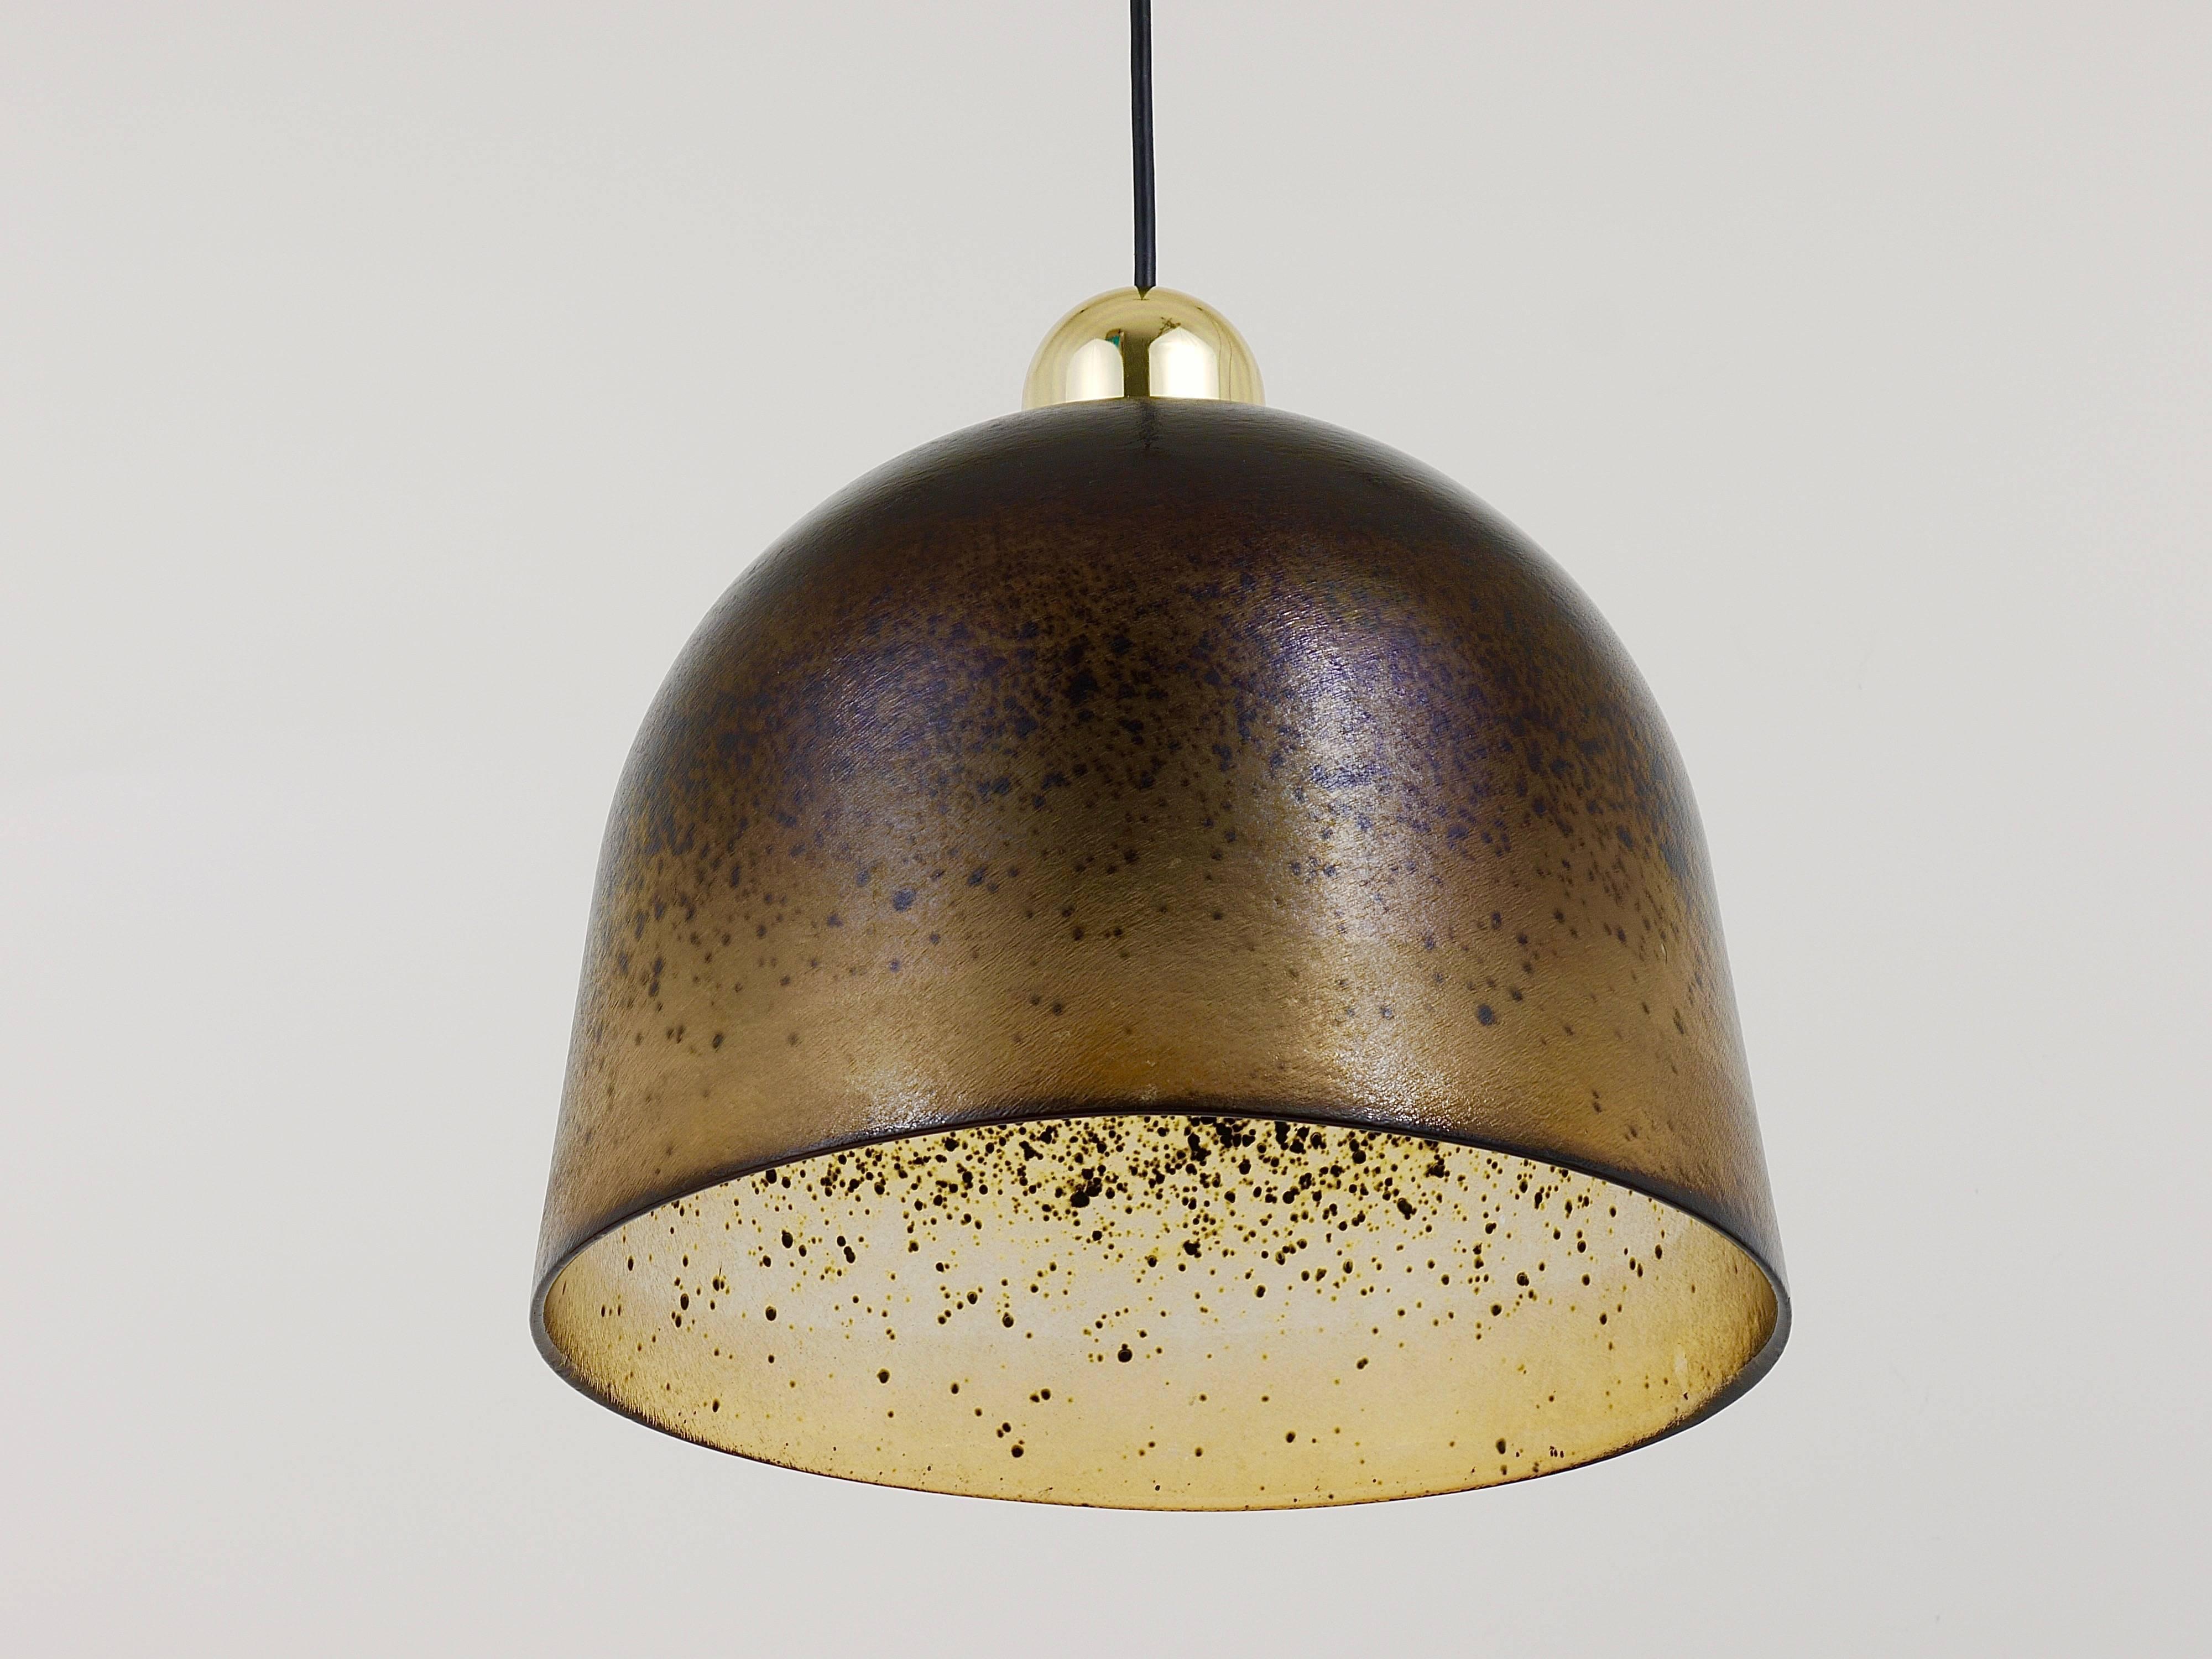 A beautiful pendant light with a solid handblown lampshade, made of brown and light-brown glass. Executed in the 1970s by Peill and Putzler Germany. A stunning lamp, which makes wonderful light. In very good condition. Marked on the lampshade. One